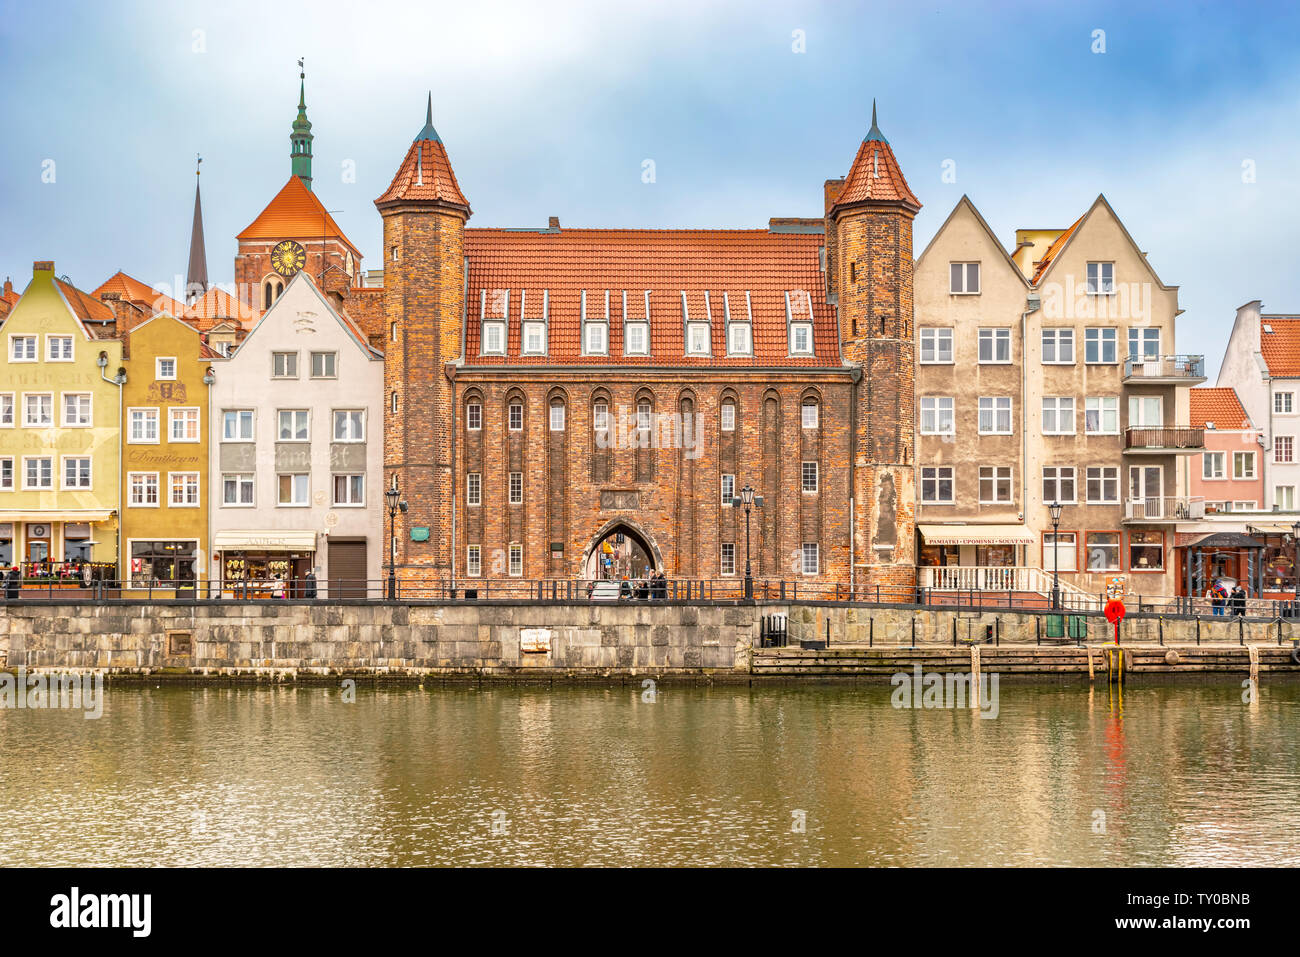 Gdansk, Poland – Feb 14, 2019: View at historic houses and the Mariacka Gate building facade along Motlawa river in Gdansk, Poland Stock Photo